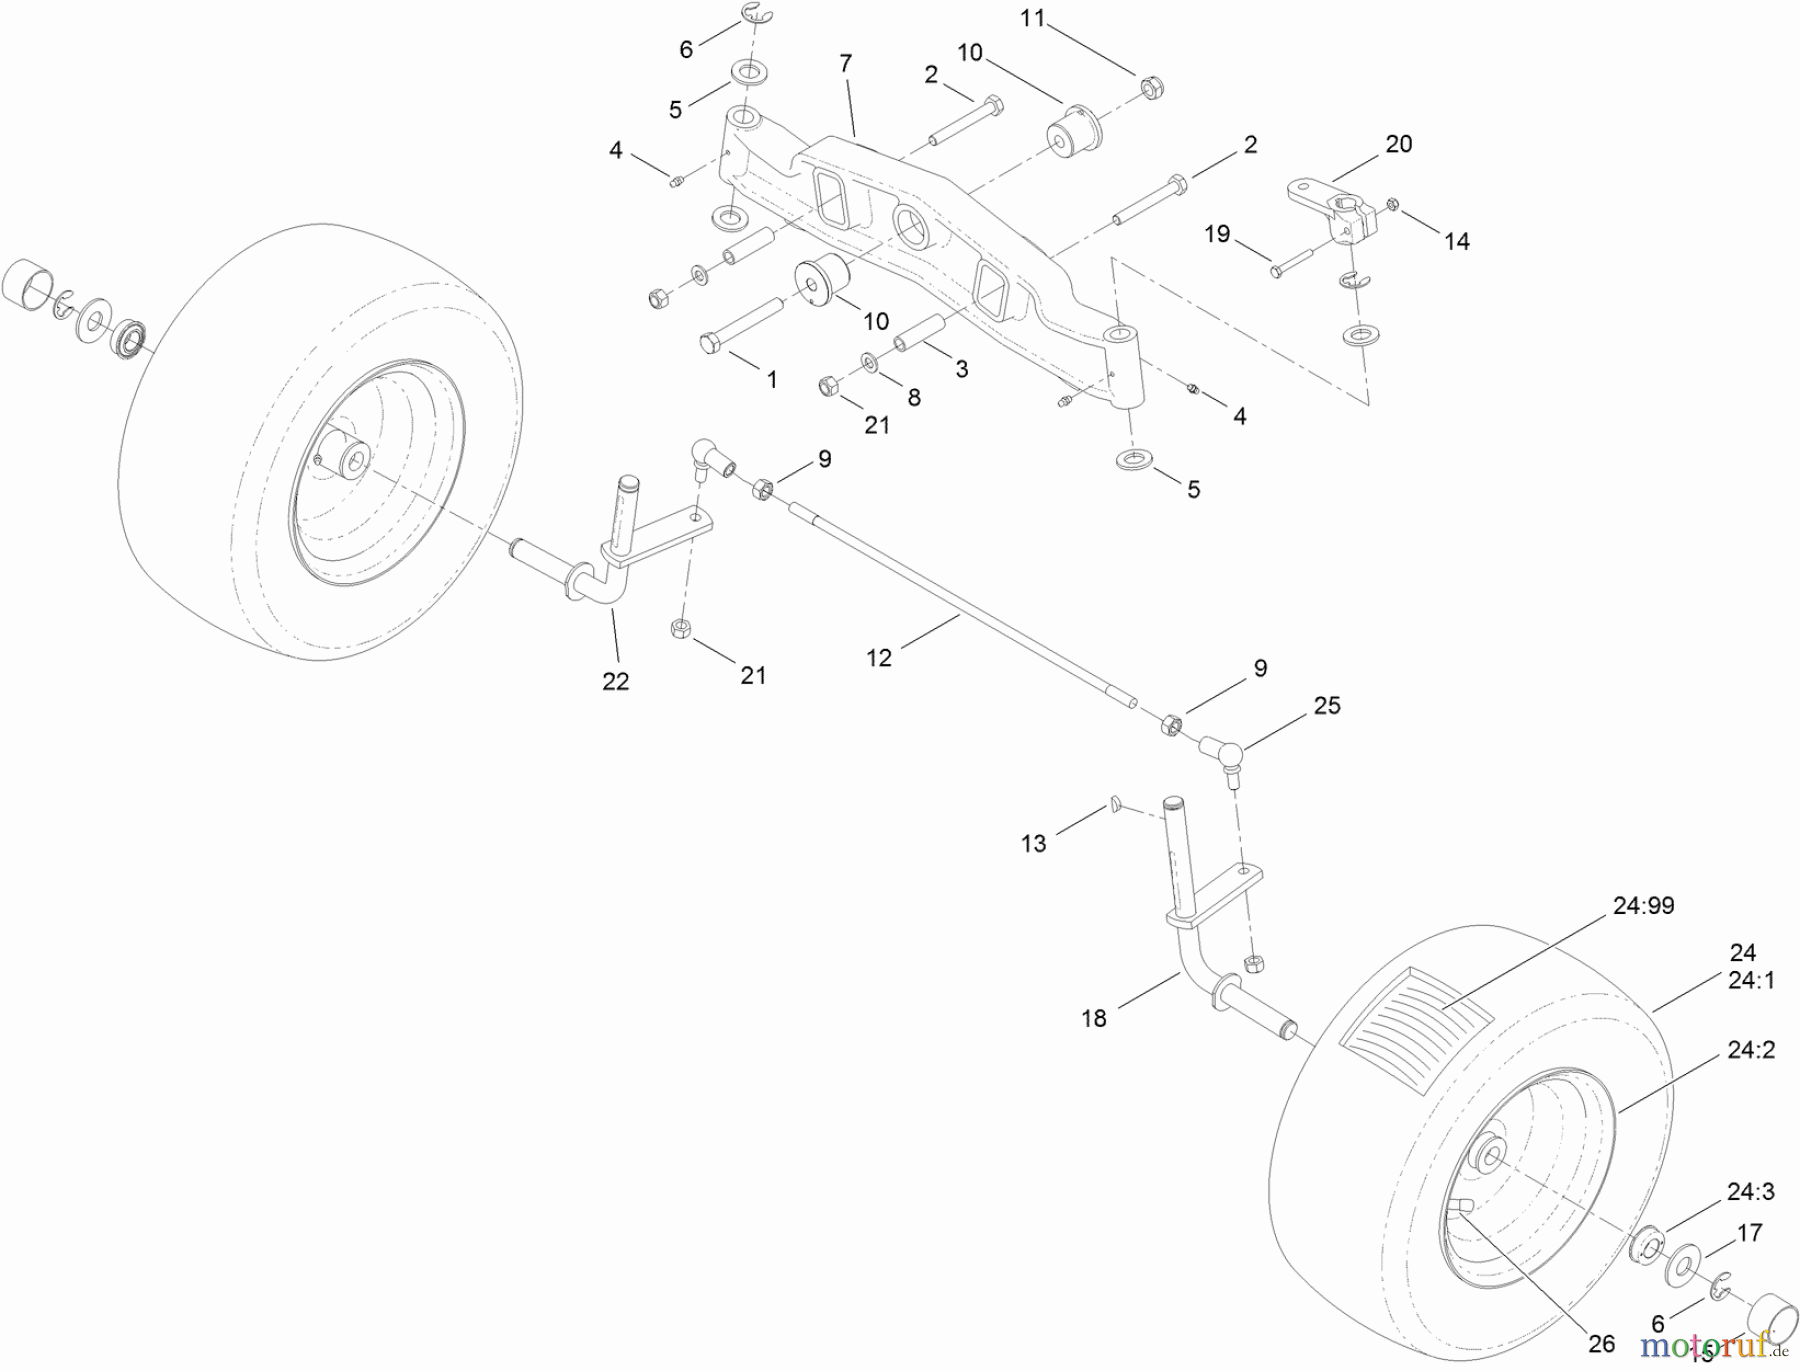  Toro Neu Mowers, Lawn & Garden Tractor Seite 1 74582 (DH 210) - Toro DH 210 Lawn Tractor, 2011 (311000001-311999999) FRONT AXLE ASSEMBLY